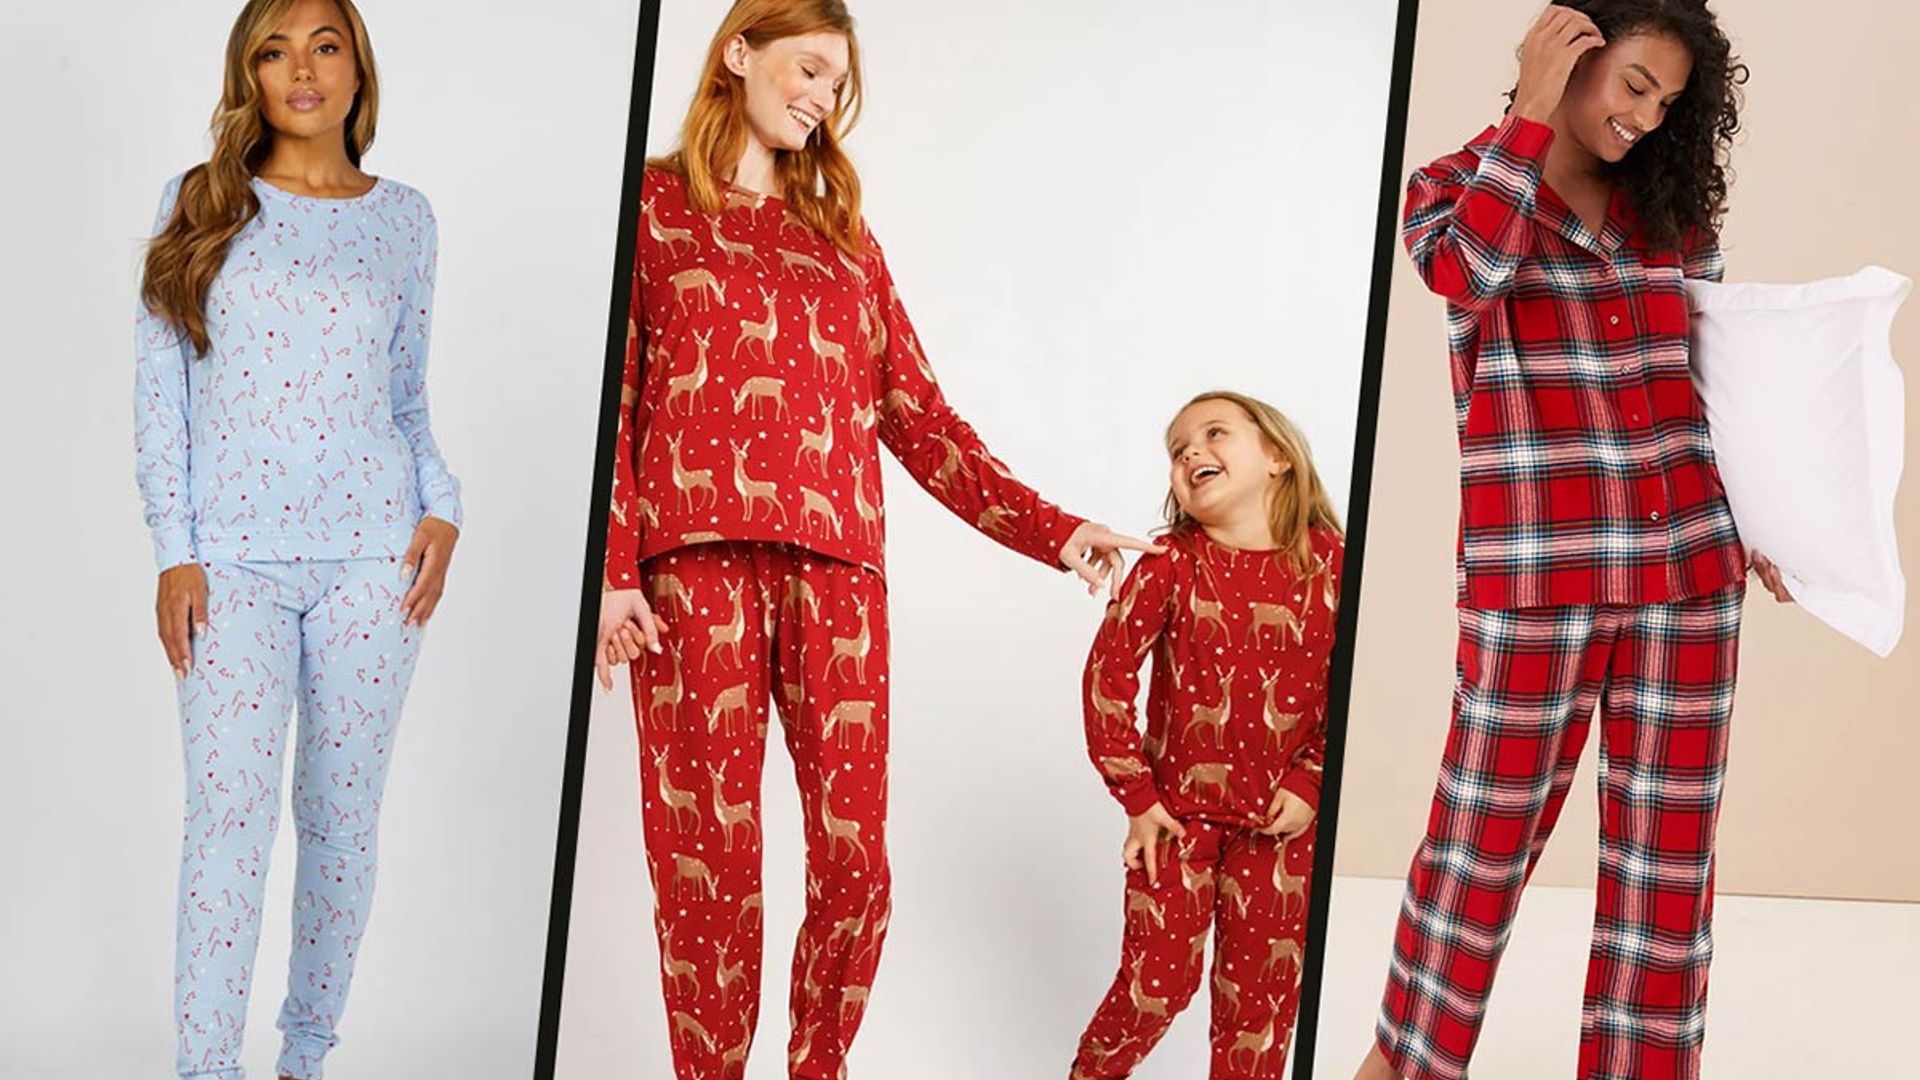 11 best Christmas pyjamas for the family 2022 Matching sets from M&S